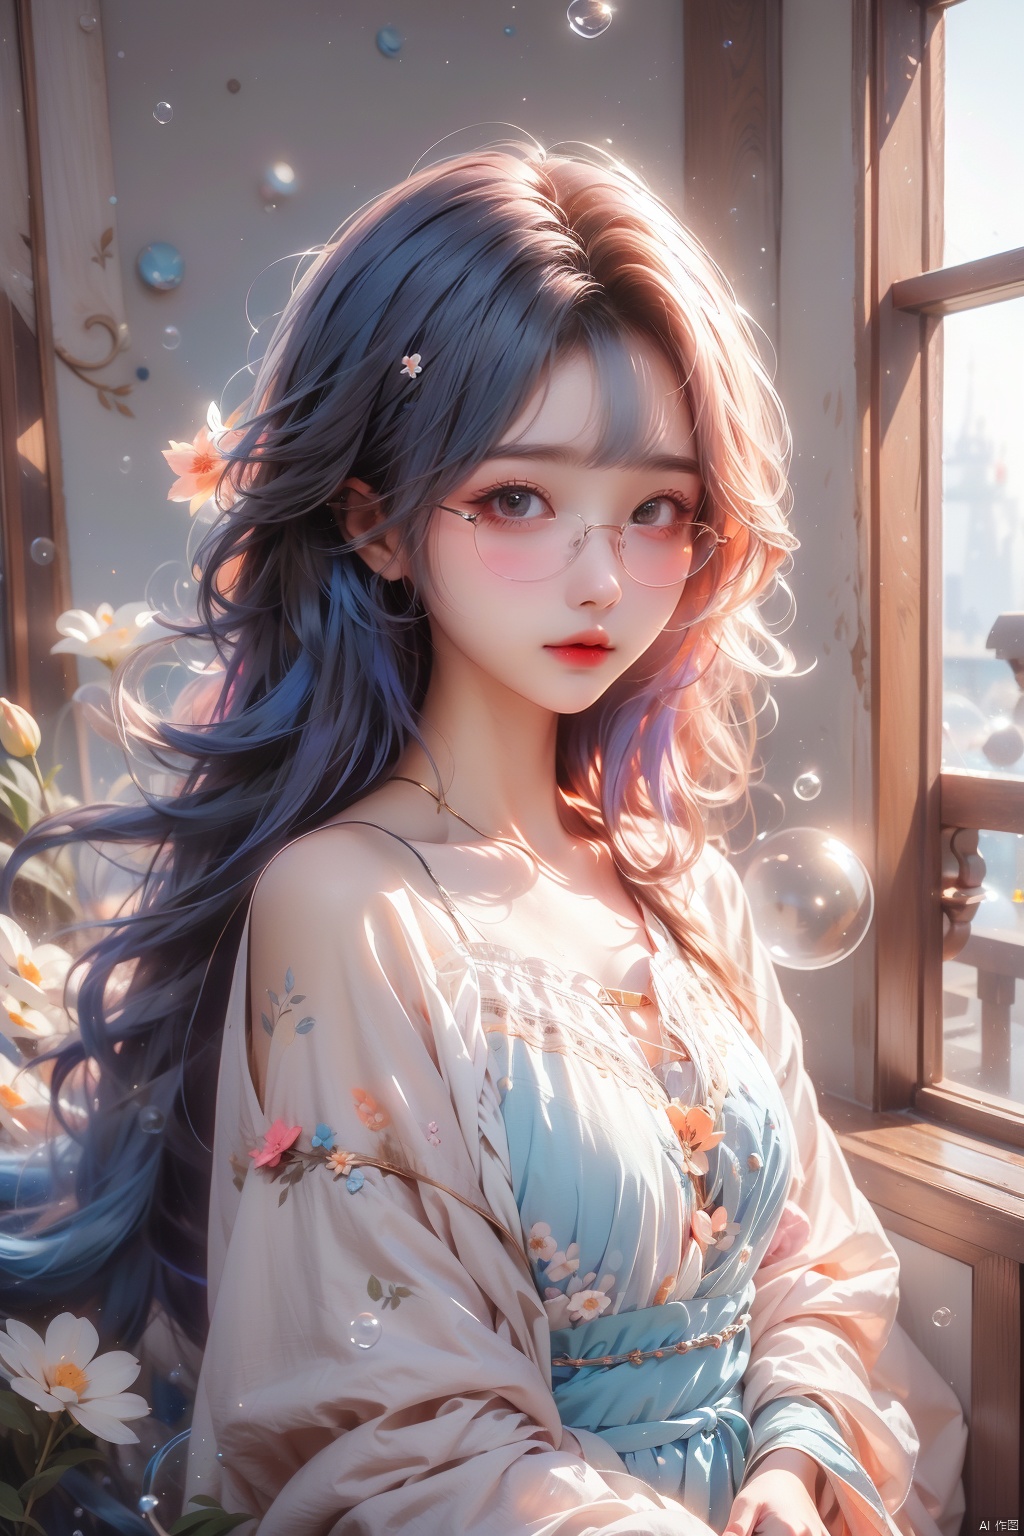  1girl,glowing,blue hair,glasses,bubble,short hair,sewater,standing,masterpiece,best quality,windows,bangs,flower,simple_background, jiqing, Light master,moyou, 1 girl